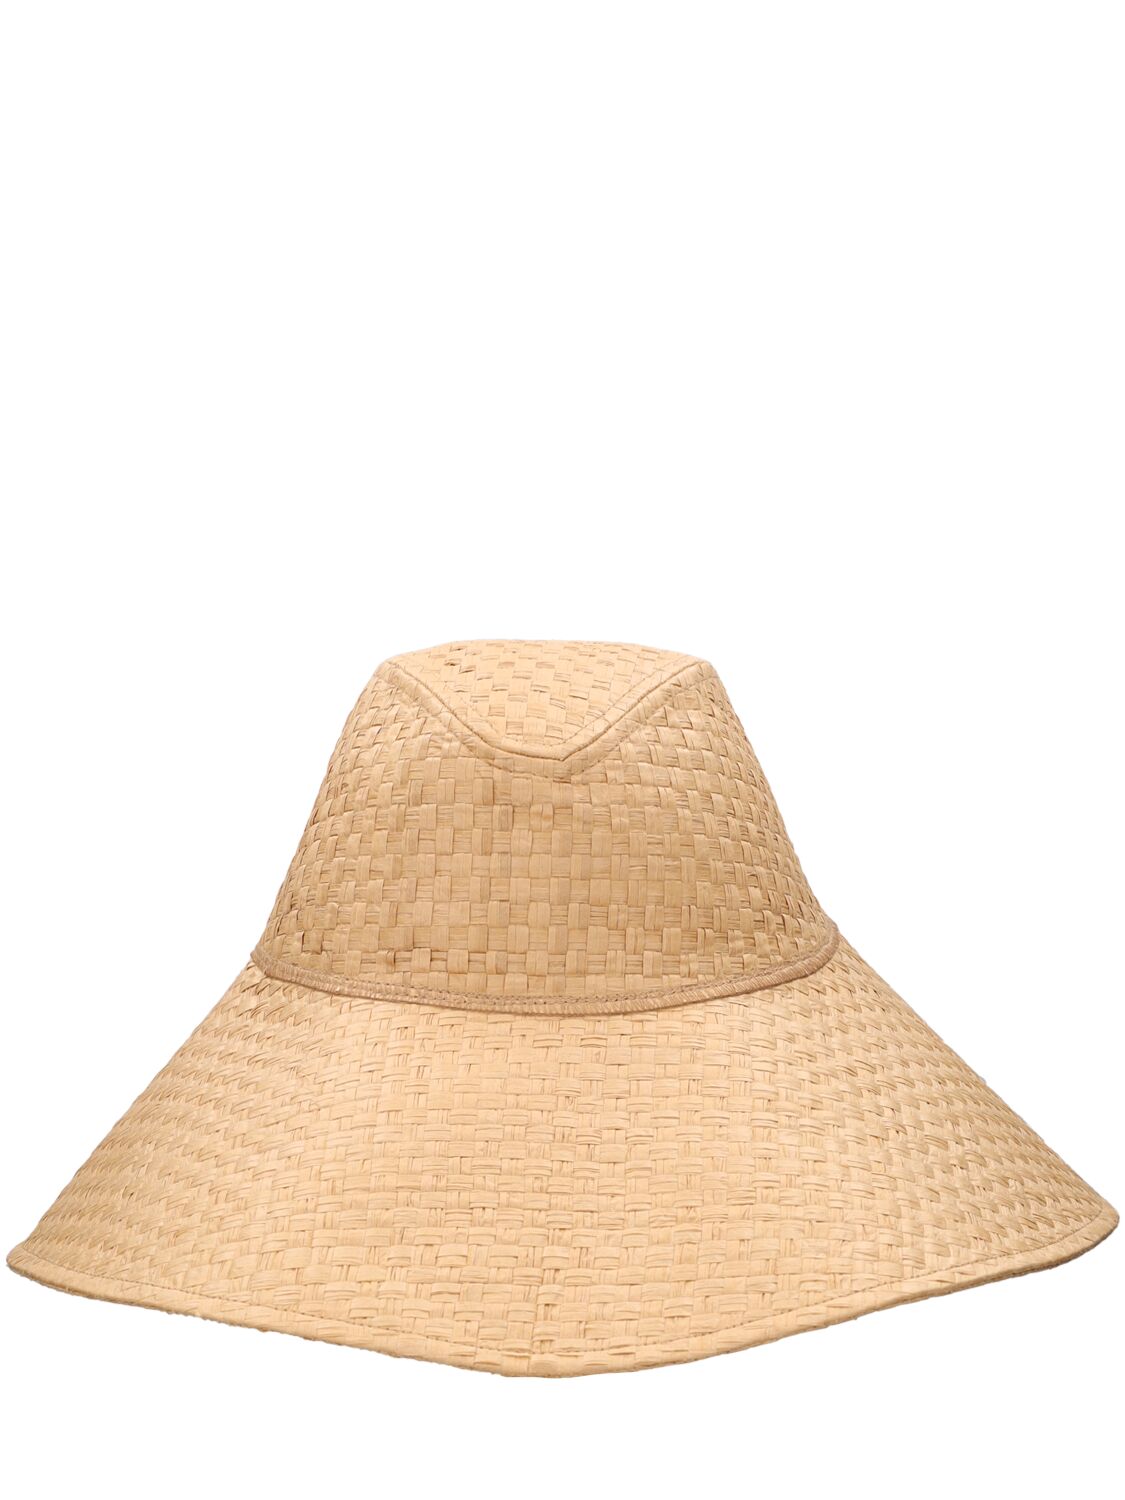 Image of The Cove Woven Straw Hat